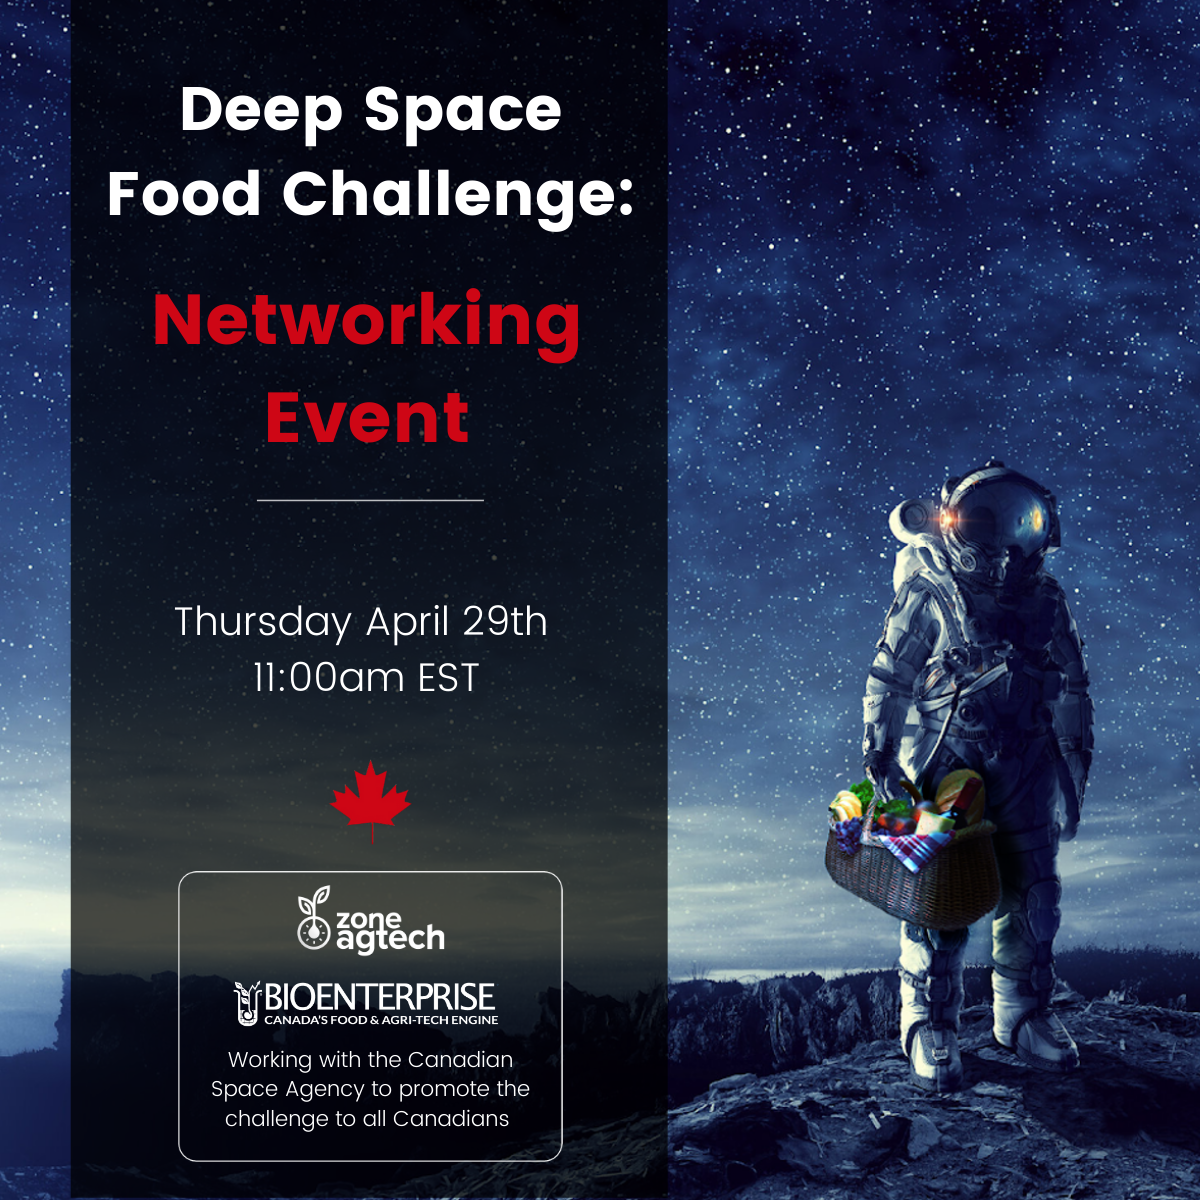 DEEP SPACE FOOD CHALLENGE NETWORKING EVENT